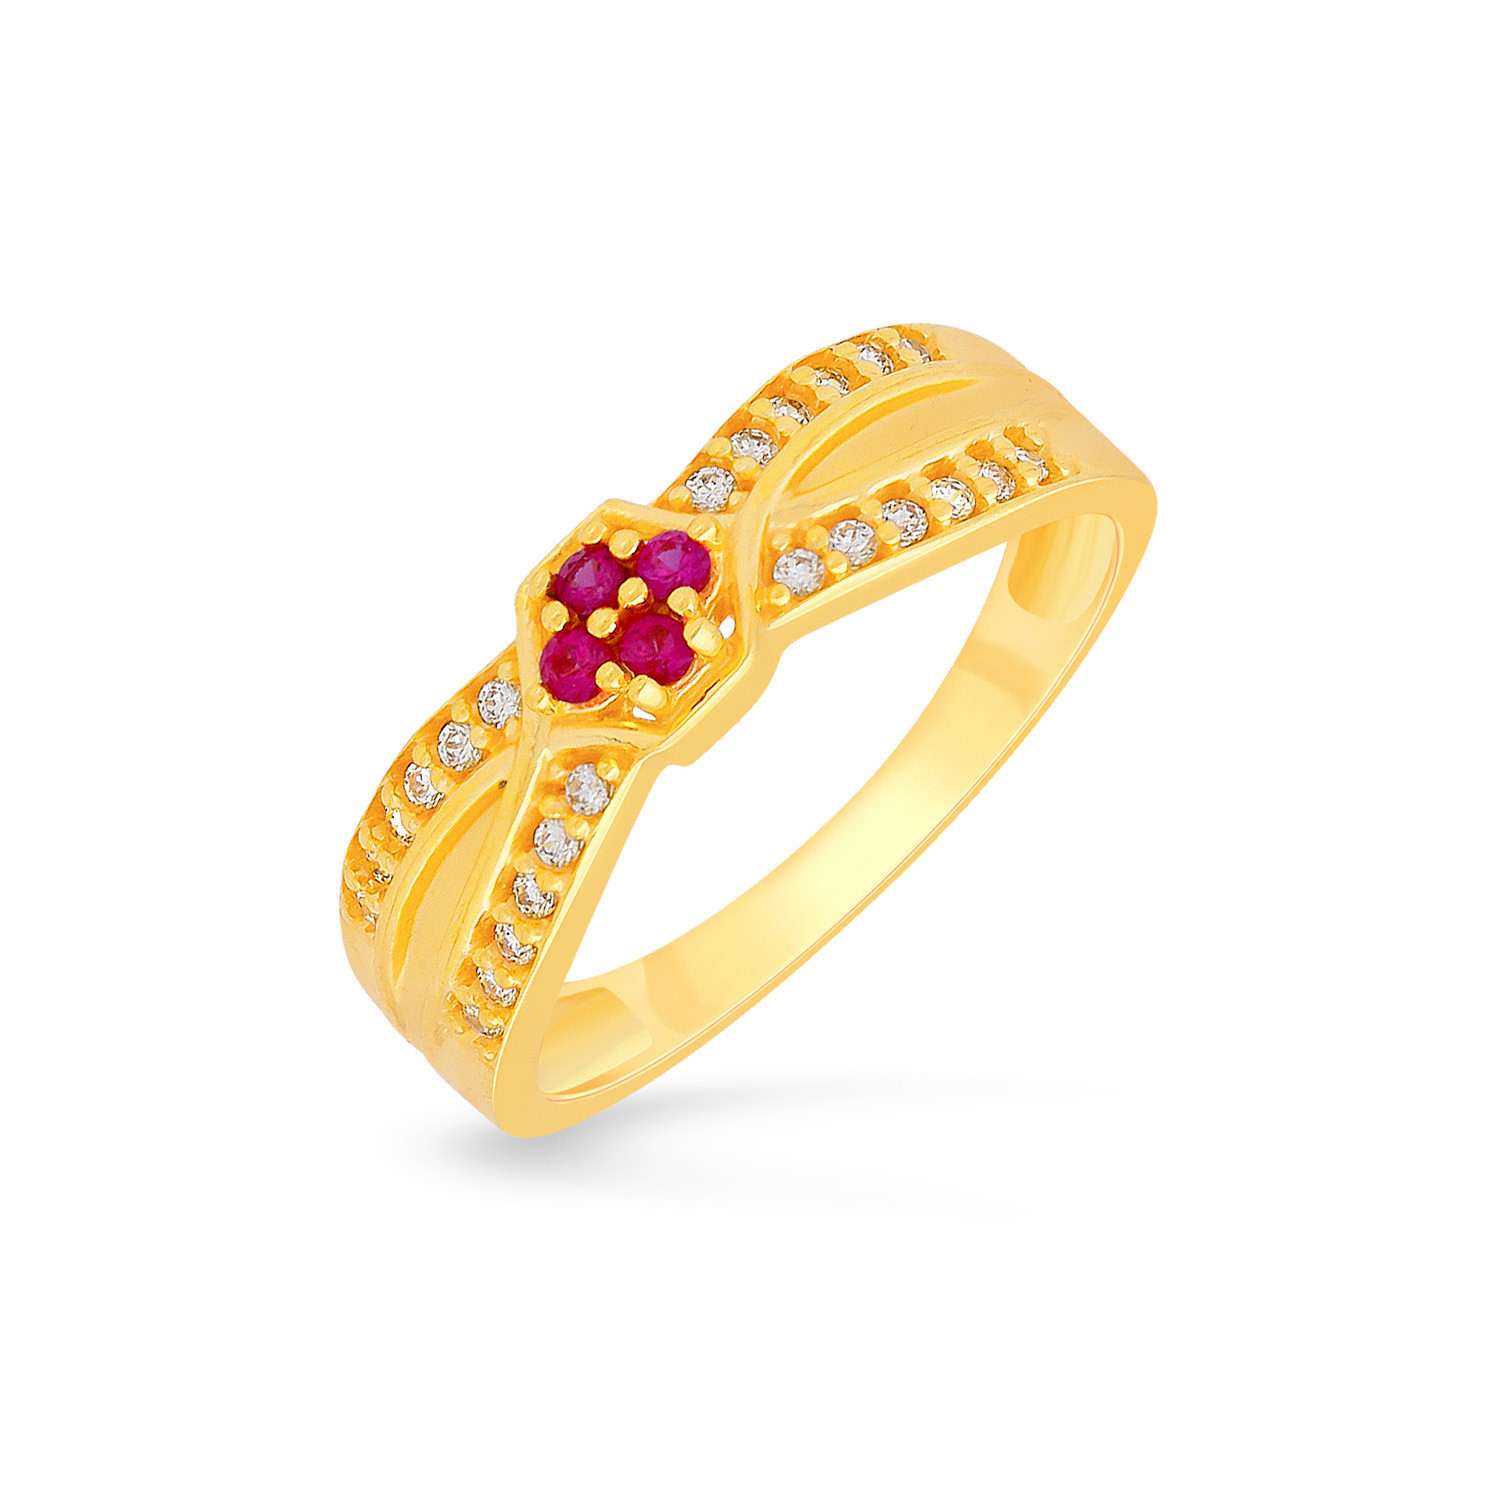 Buy MALABAR GOLD AND DIAMONDS Womens Precia Gold Ring - Size 11 | Shoppers  Stop